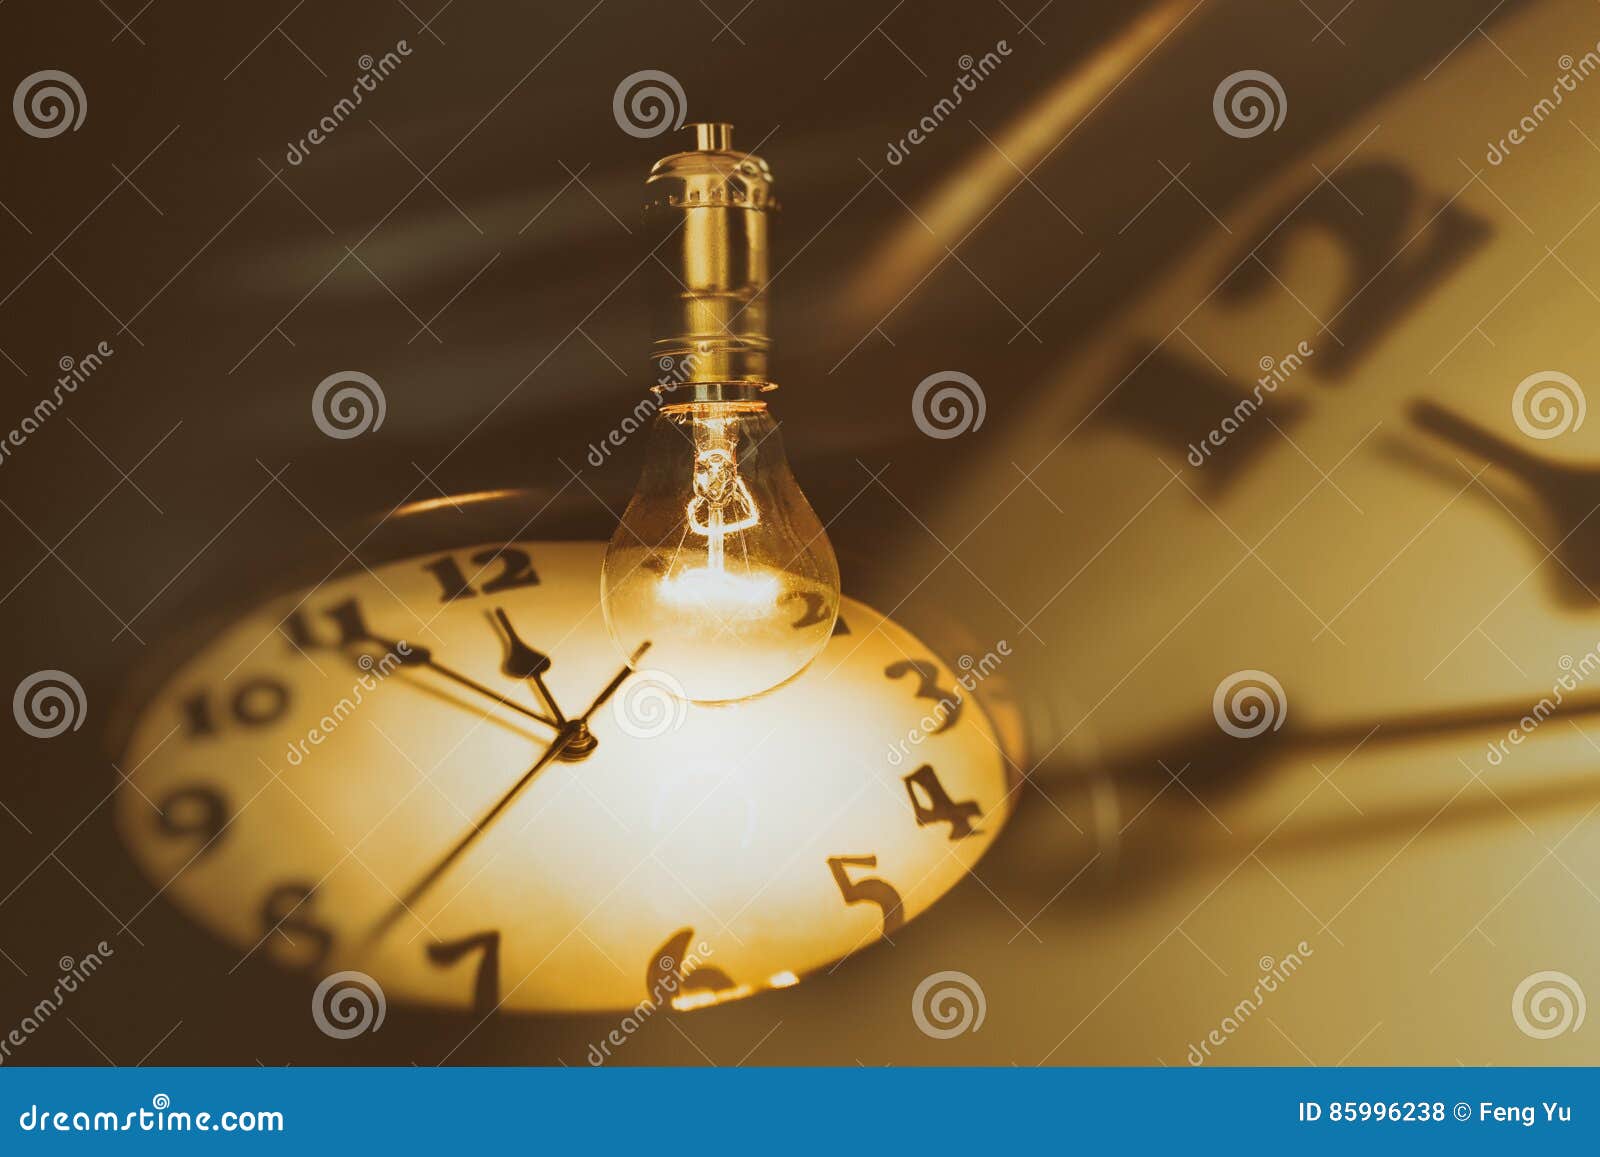 Light bulb and clock stock photo. Image of inspiration - 85996238